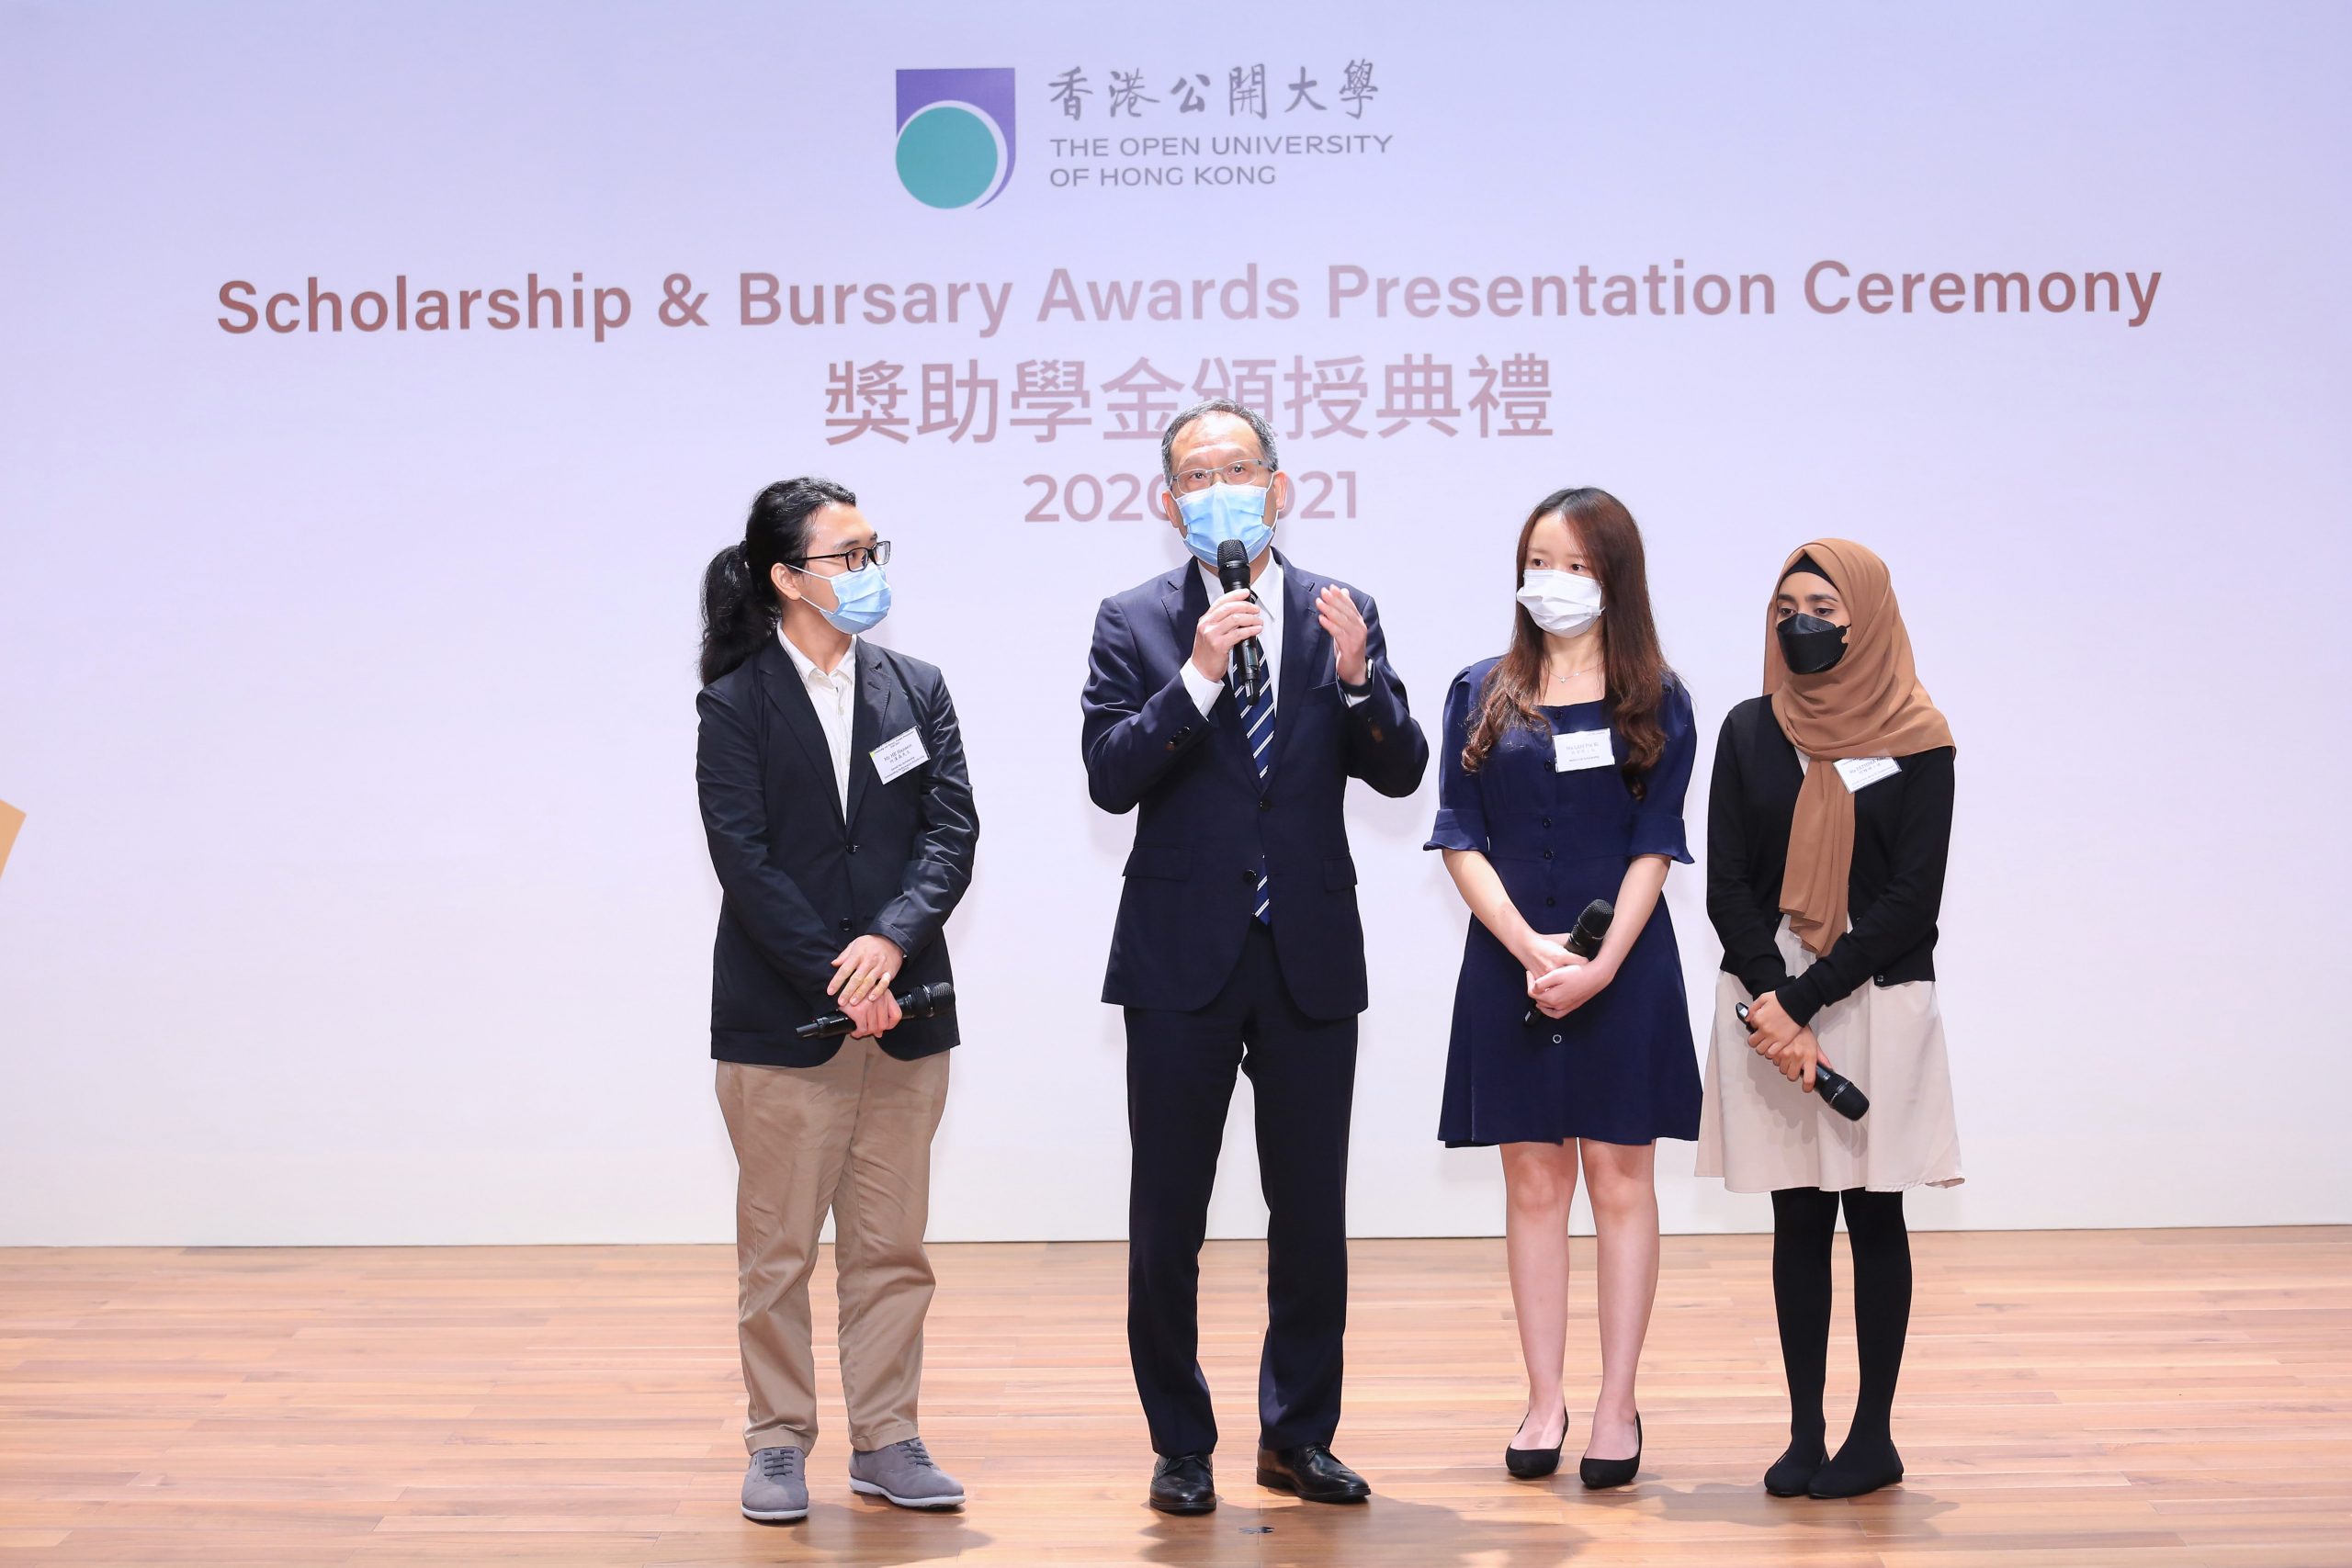 OUHK President Prof. Paul Lam Kwan-sing (second from left) interacts with three scholarship recipients. The students share their learning experience and express their appreciation to the donors.